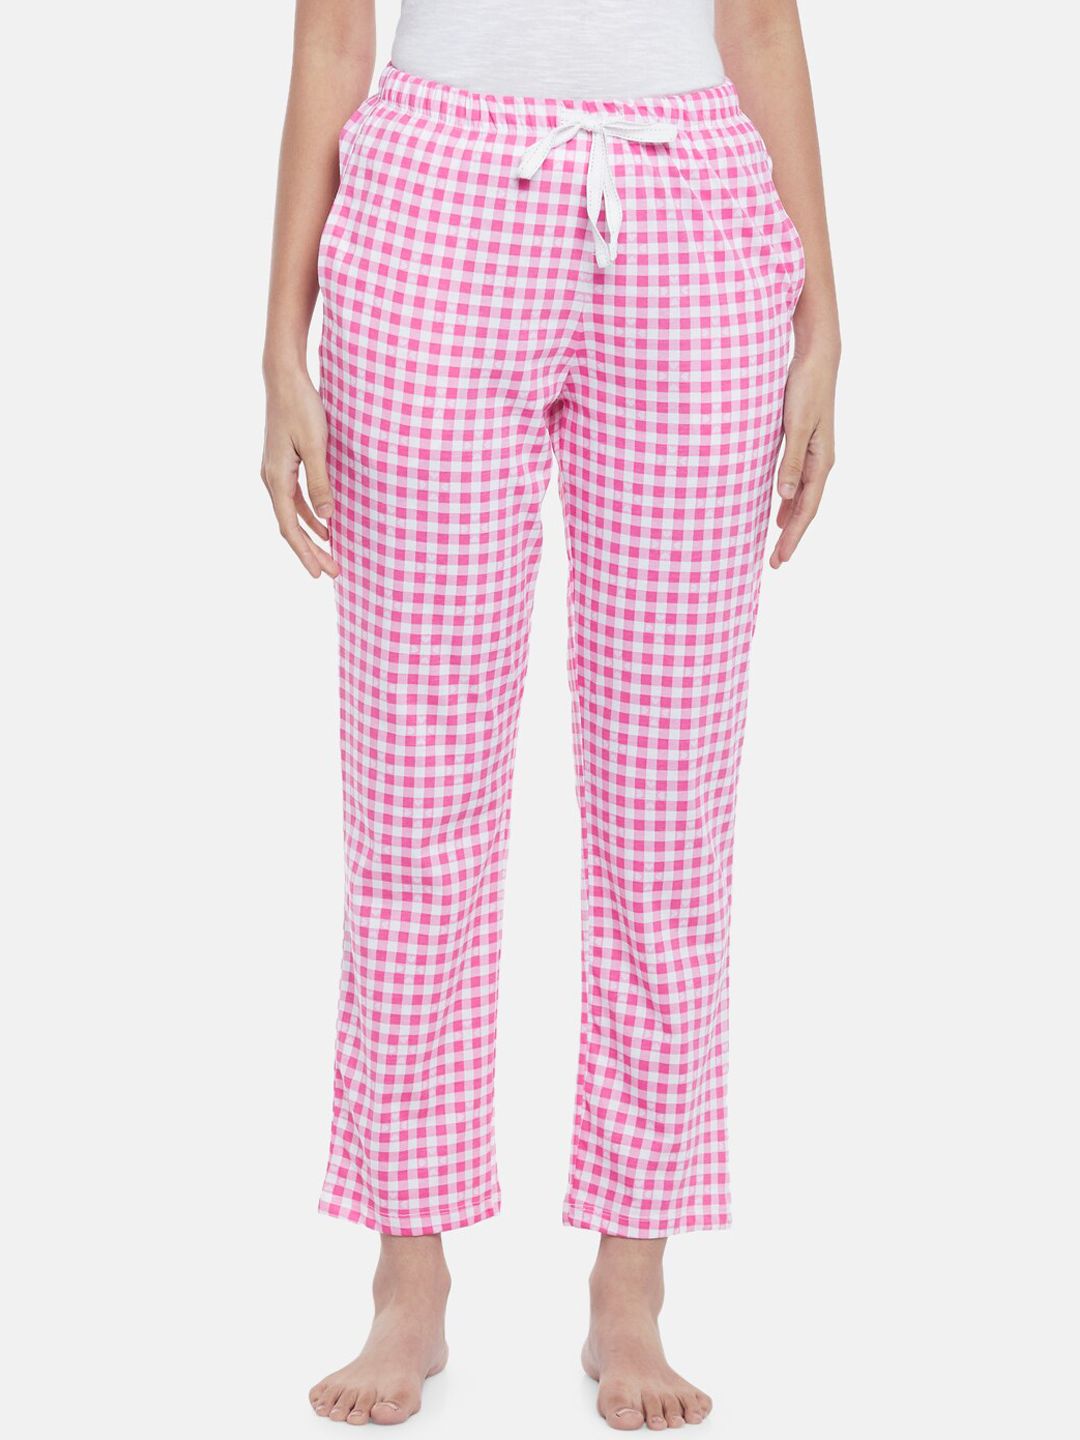 Dreamz by Pantaloons Women Pink Checked Pyjamas Price in India